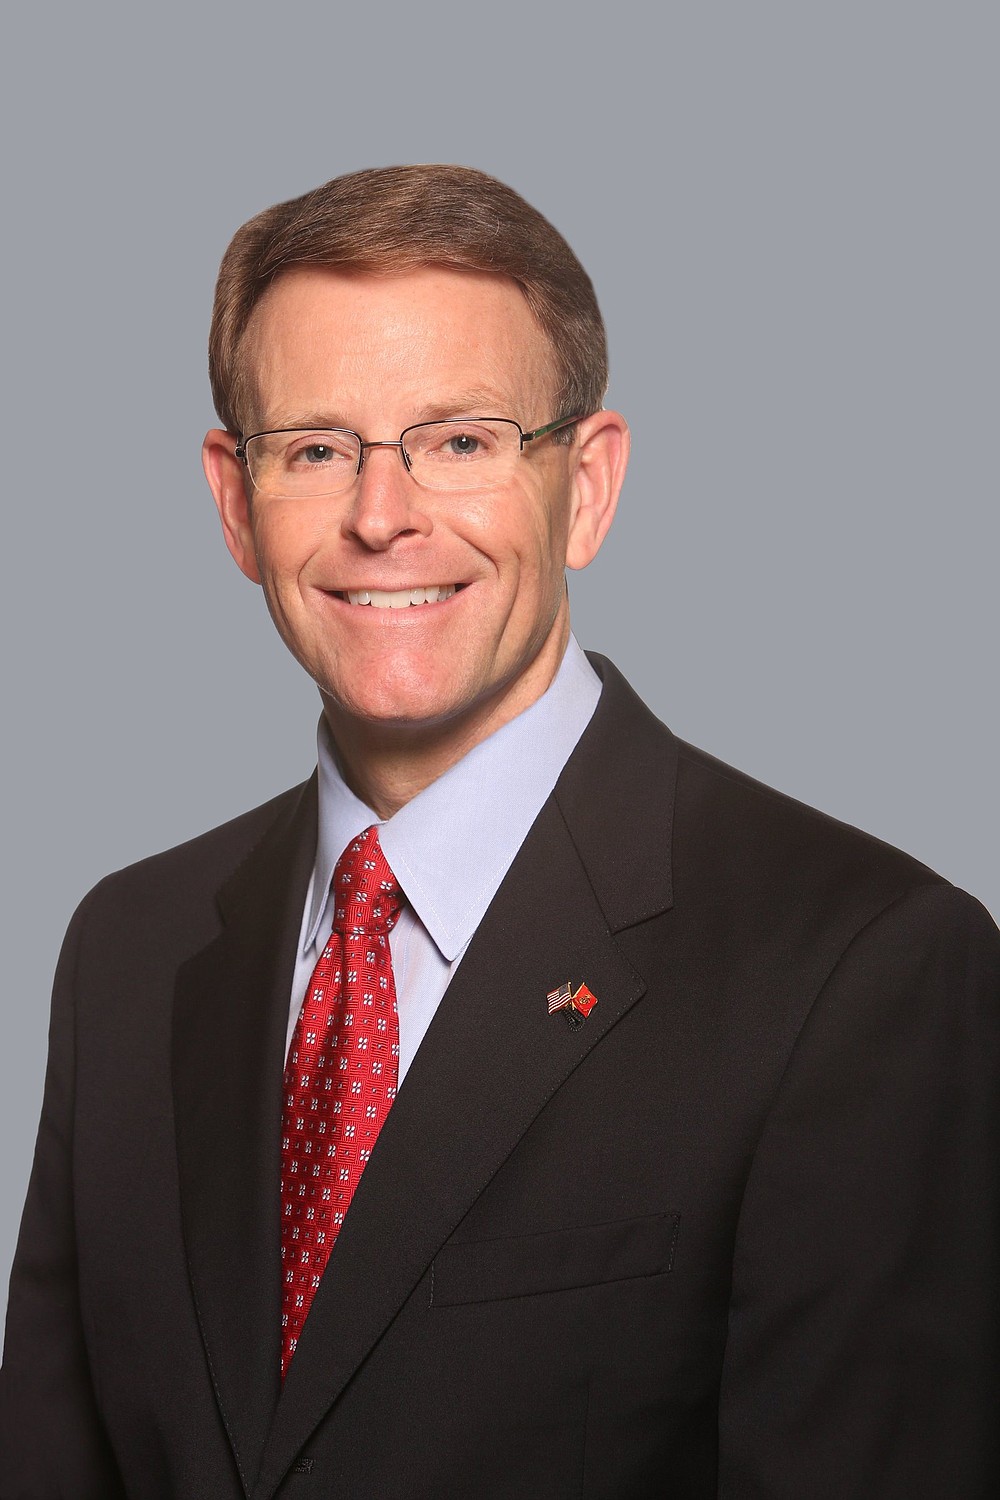 Tony Perkins, a member of the U.S. Commission on International Religious Freedom